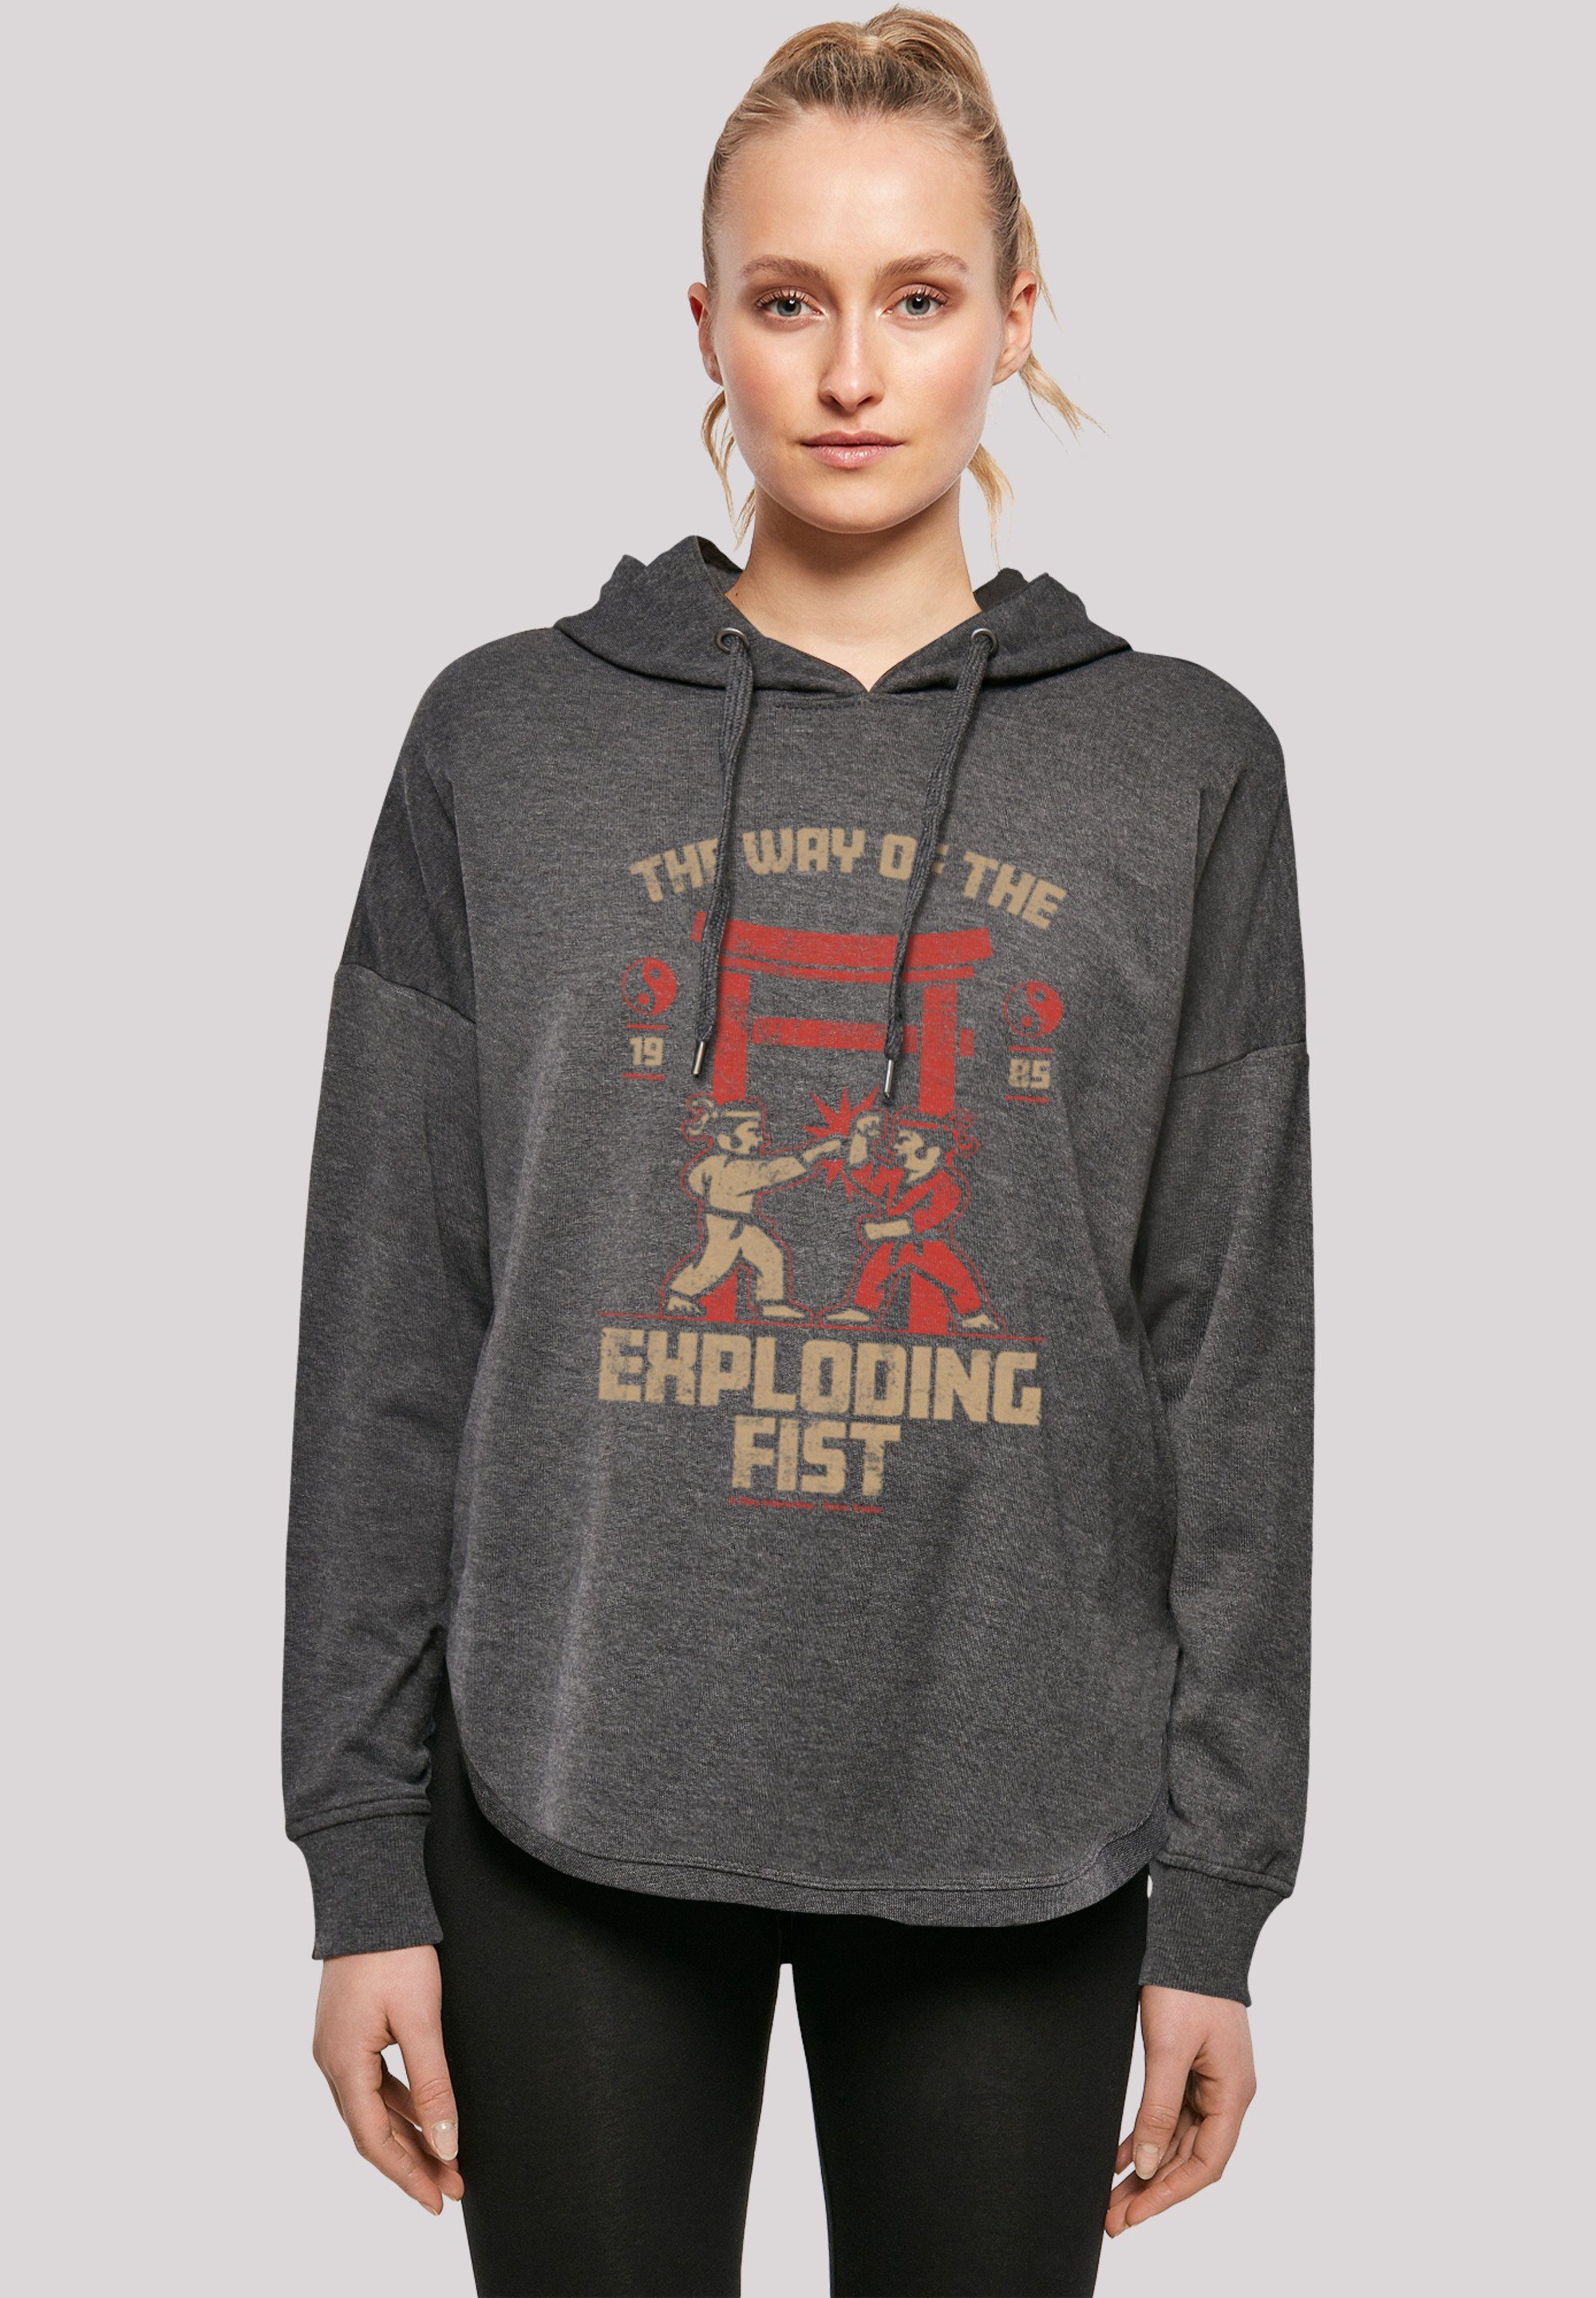 Vollkommenheit F4NT4STIC Kapuzenpullover Exploding of The Print Retro the Way charcoal Gaming Fist